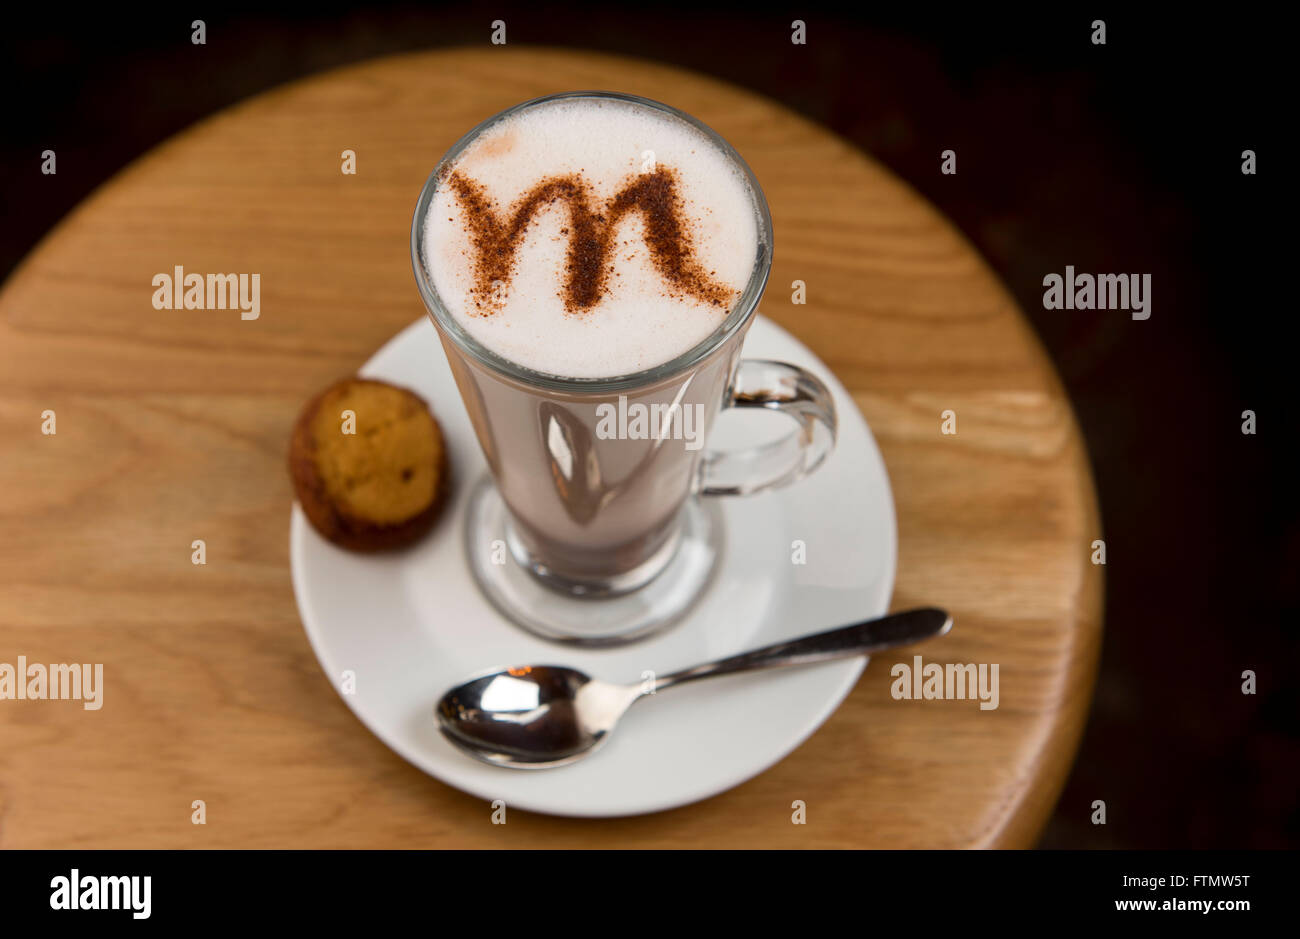 A coffee cappuccino latte with a letter M written into the milk foam. Stock Photo